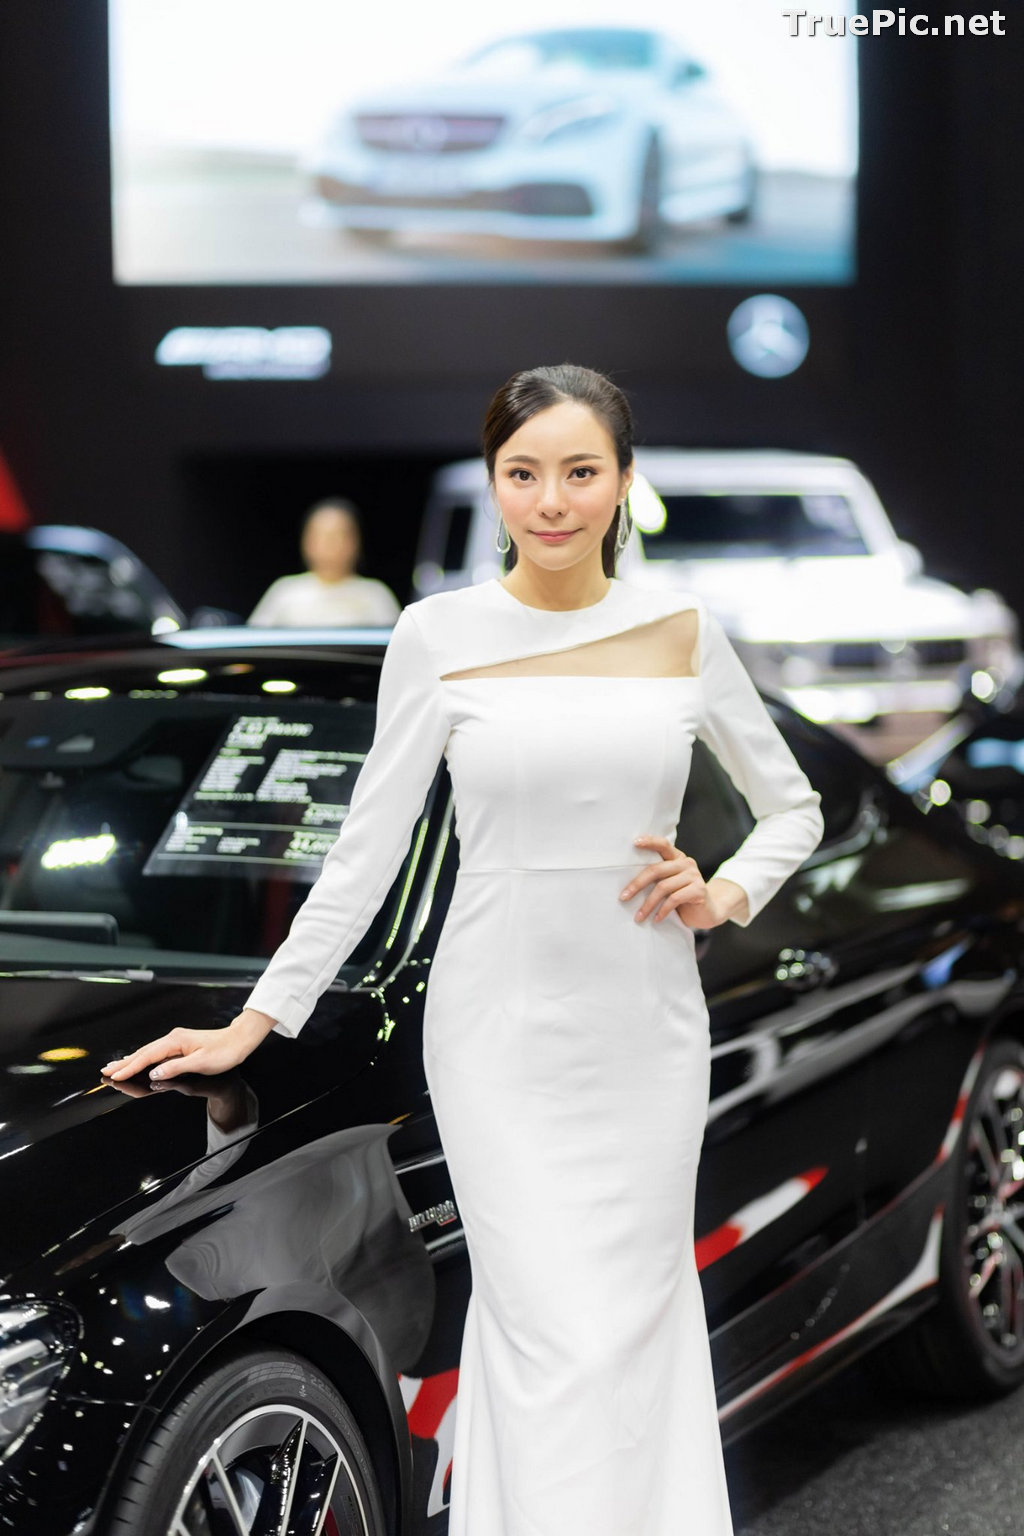 Image Thailand Racing Model at BIG Motor Sale 2019 - TruePic.net - Picture-11